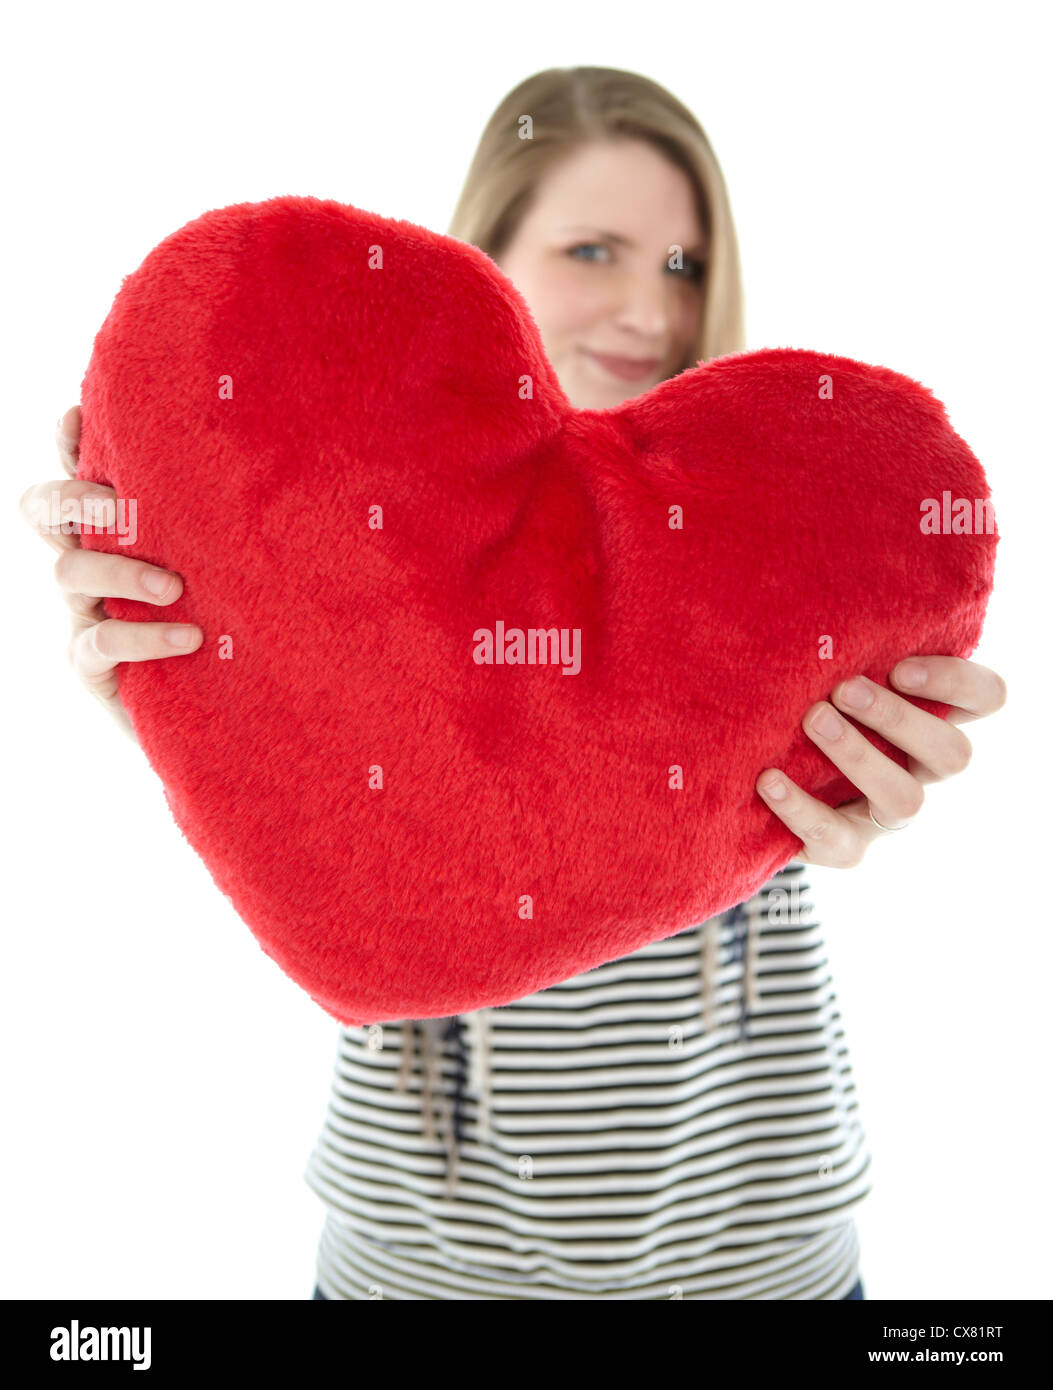 Woman with heart pillow Stock Photo